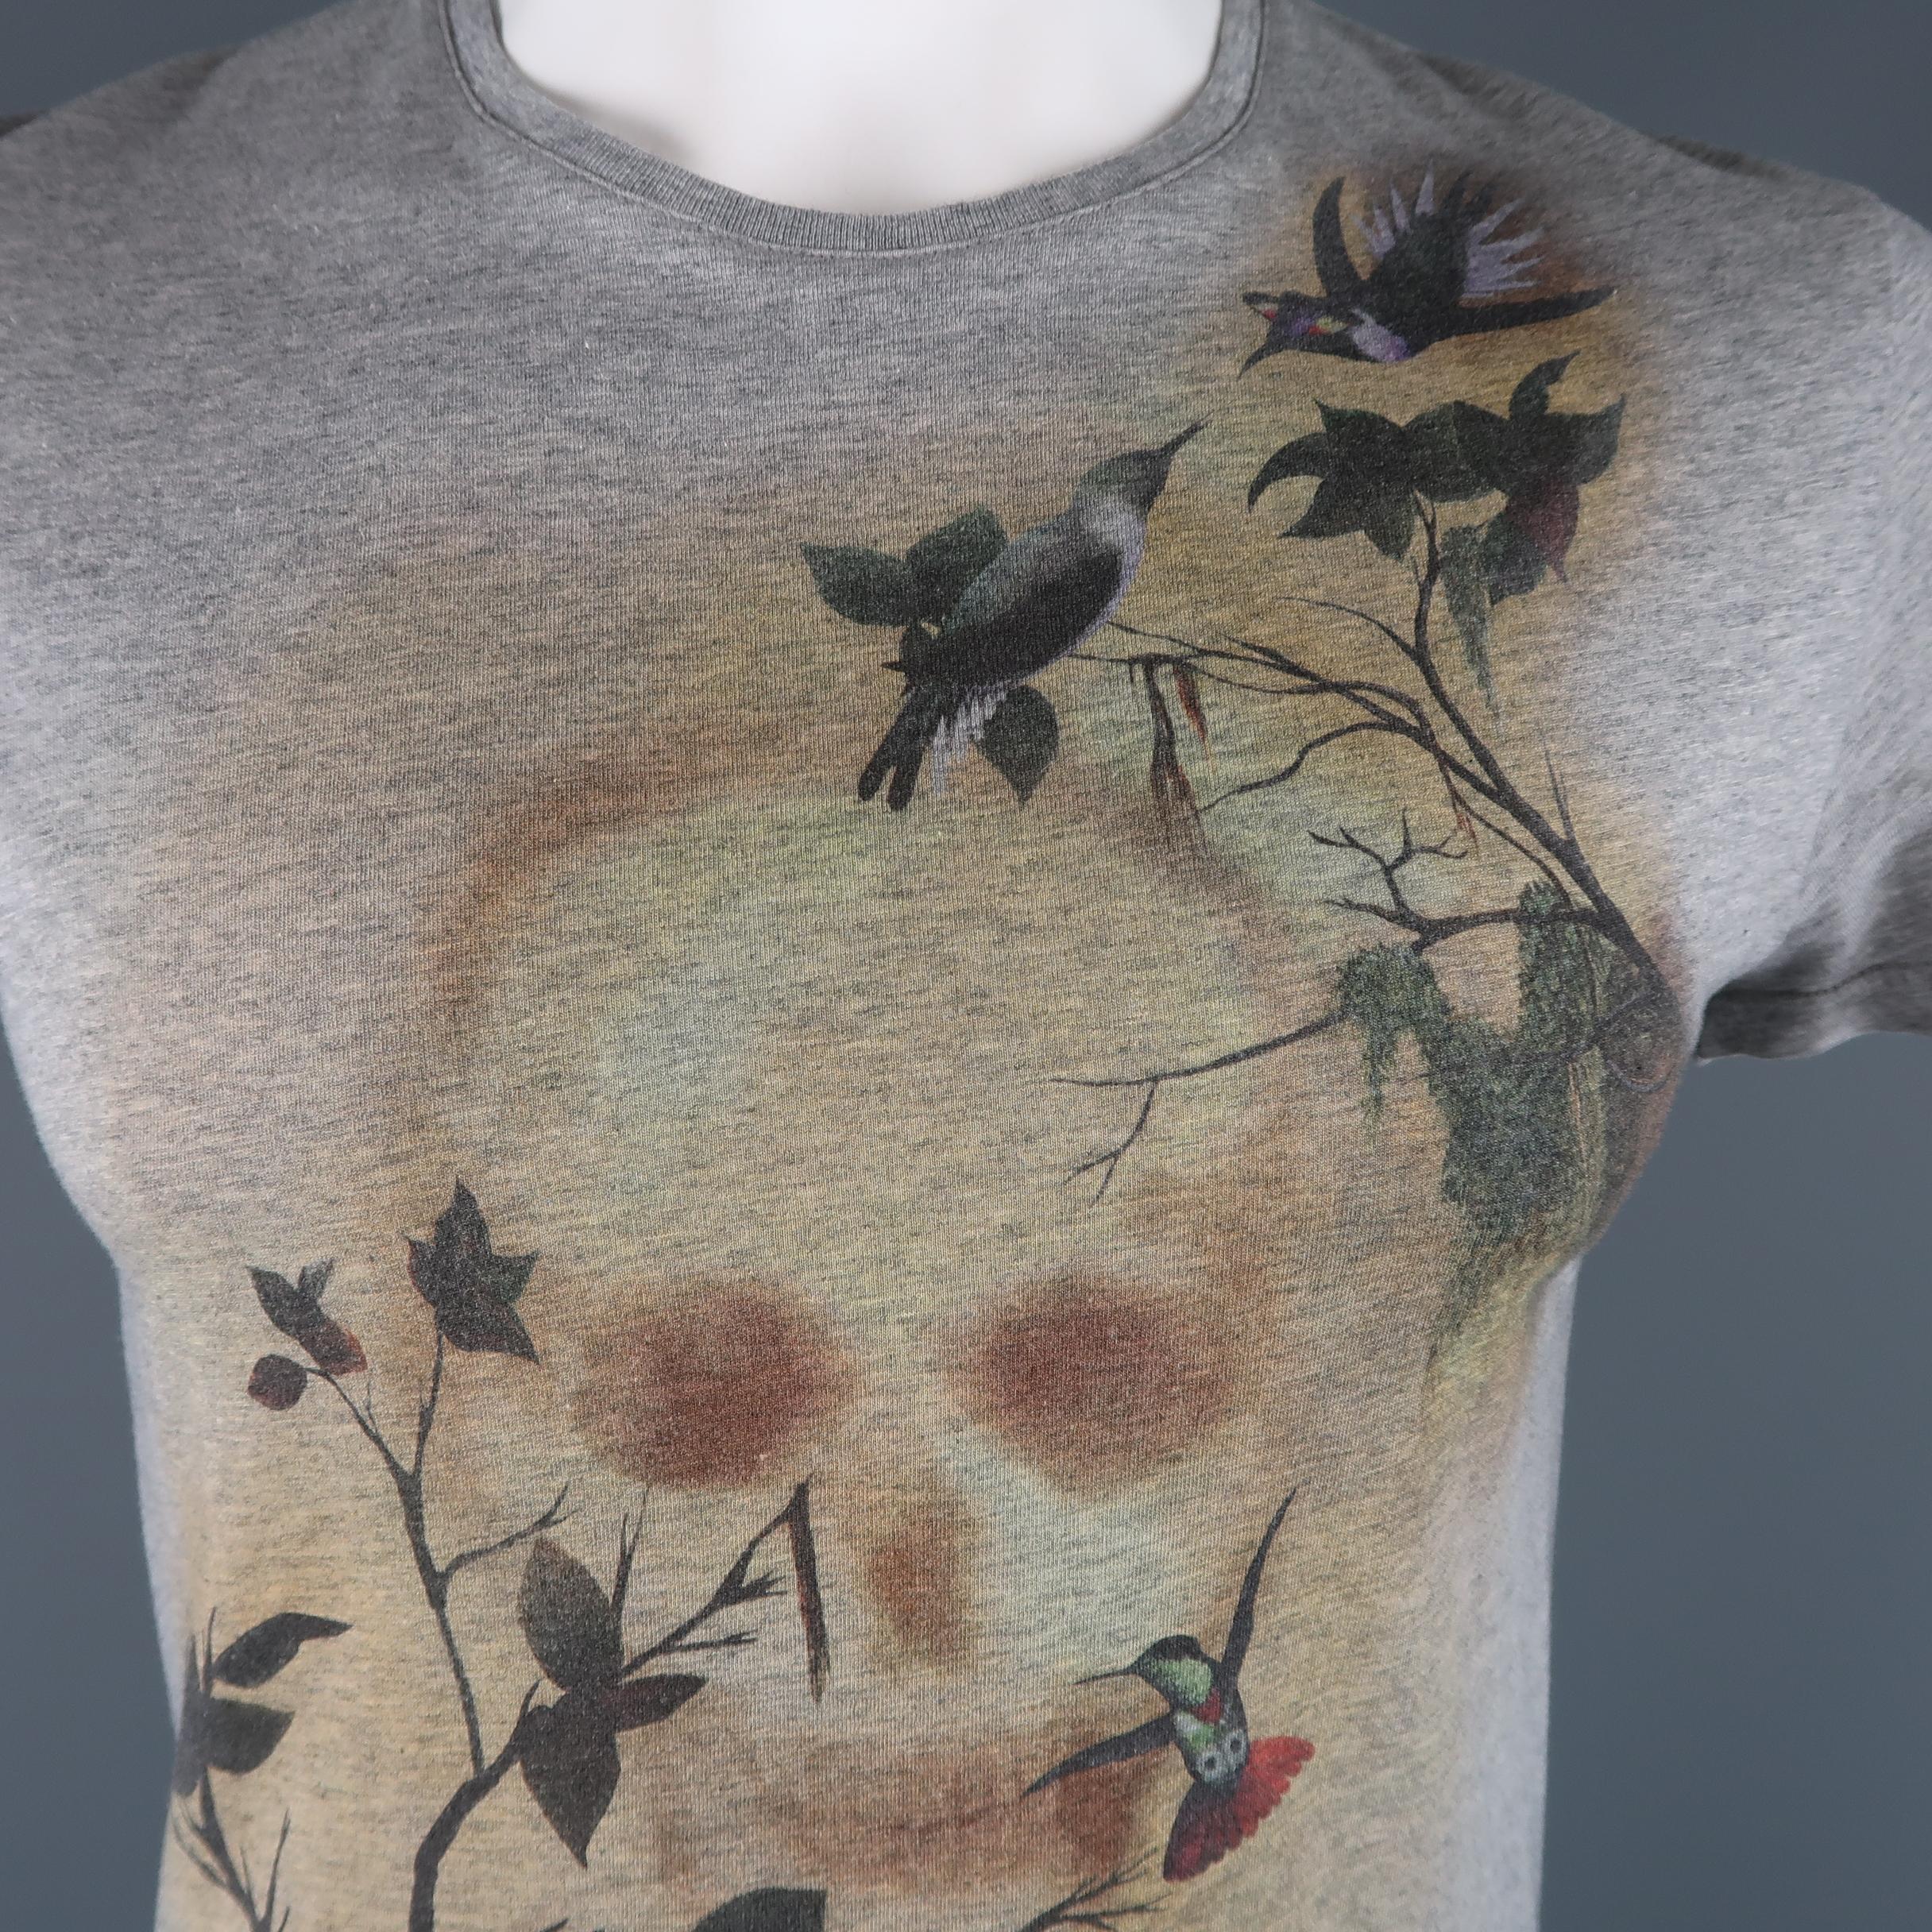 ALEXANDER MCQUEEN T-shirt comes in heather gray cotton jersey with a crewneck logo tabs, and birds and skull graphic print. Made in Italy.
 
Excellent Pre-Owned Condition.
Marked: (no size)
 
Measurements:
 
Shoulder: 18 in.
Chest: 42 in.
Sleeve: 8